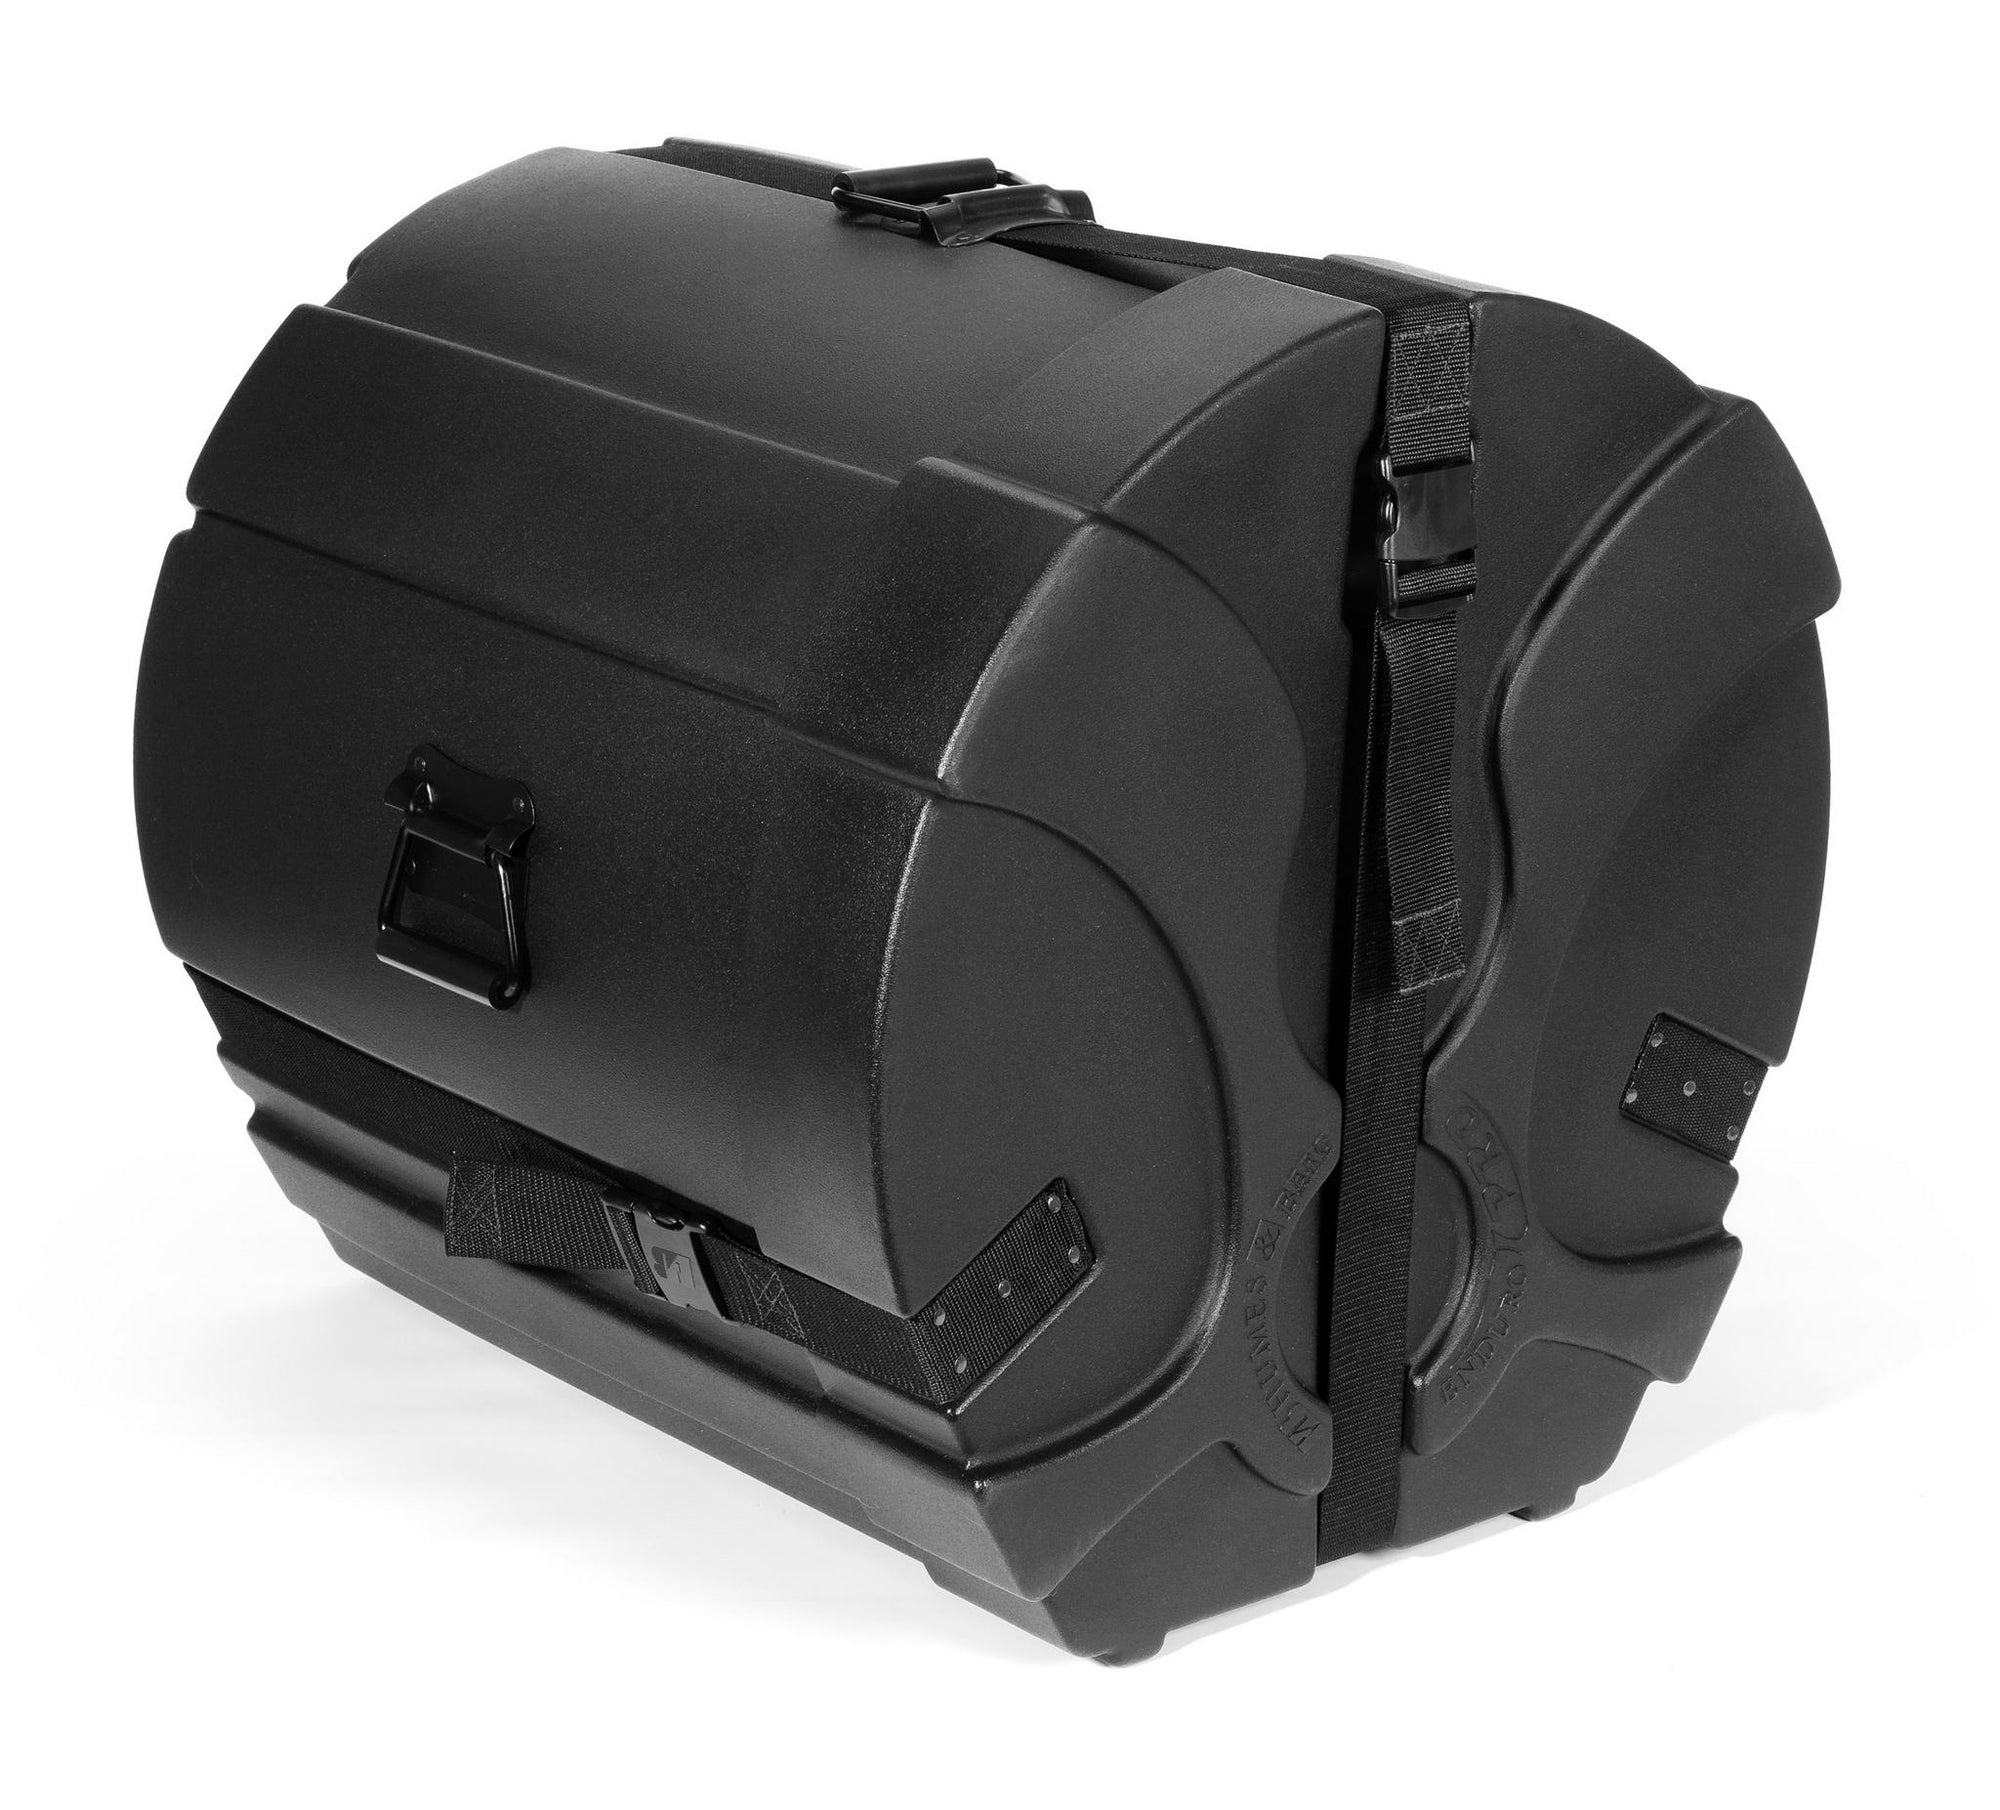 H&B Enduro Pro 16 x 24 Inches Bass Drum Case - Black with Pro Lining